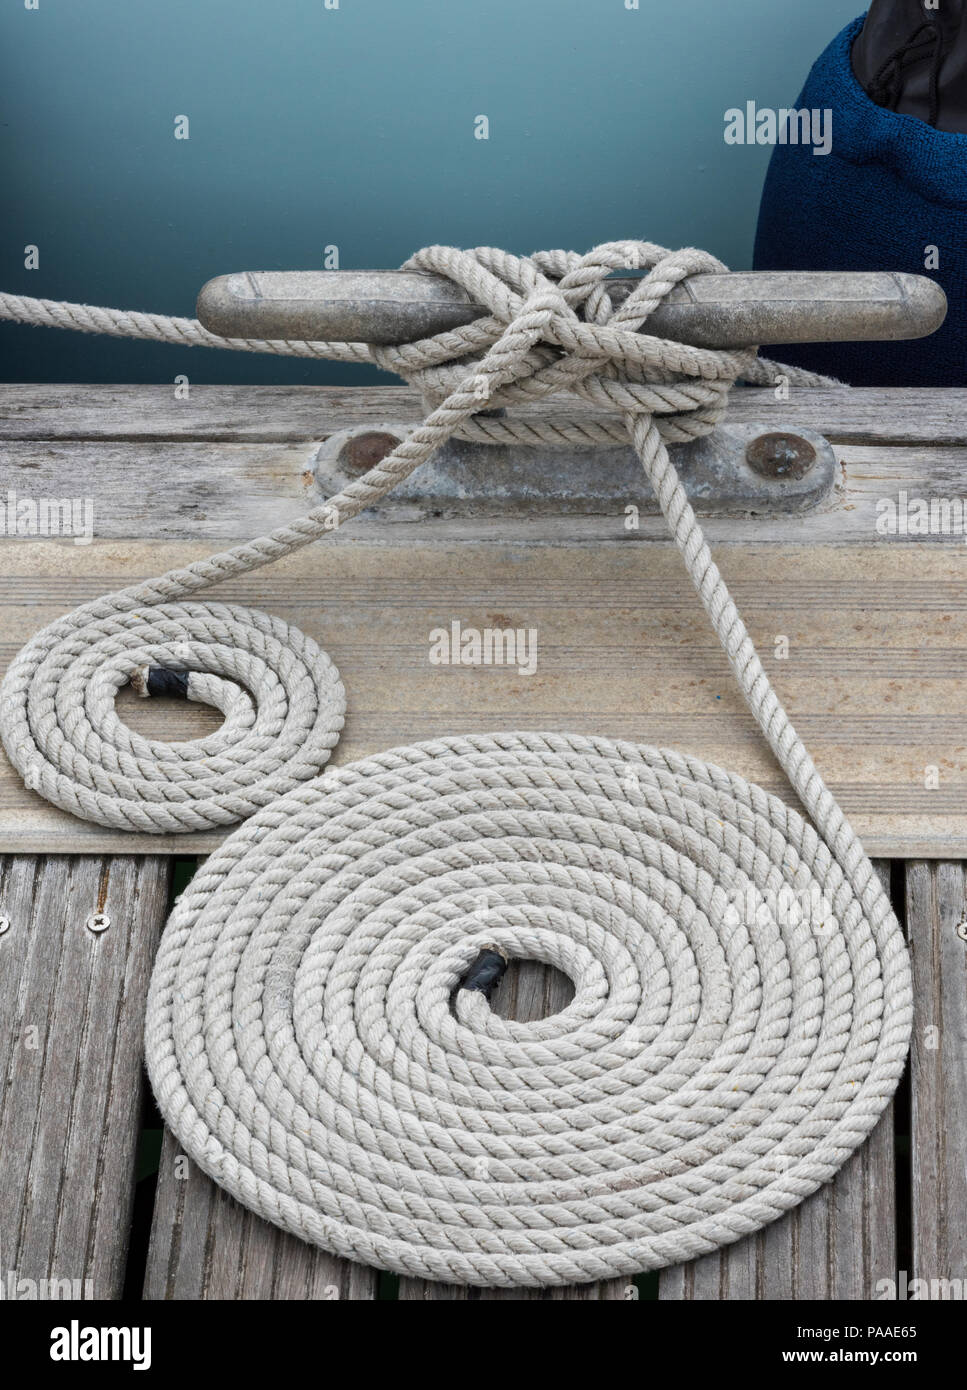 https://c8.alamy.com/comp/PAAE65/neatly-coiled-rope-on-a-wooden-jetty-in-a-yacht-marina-rope-cheeses-or-cheesed-down-PAAE65.jpg